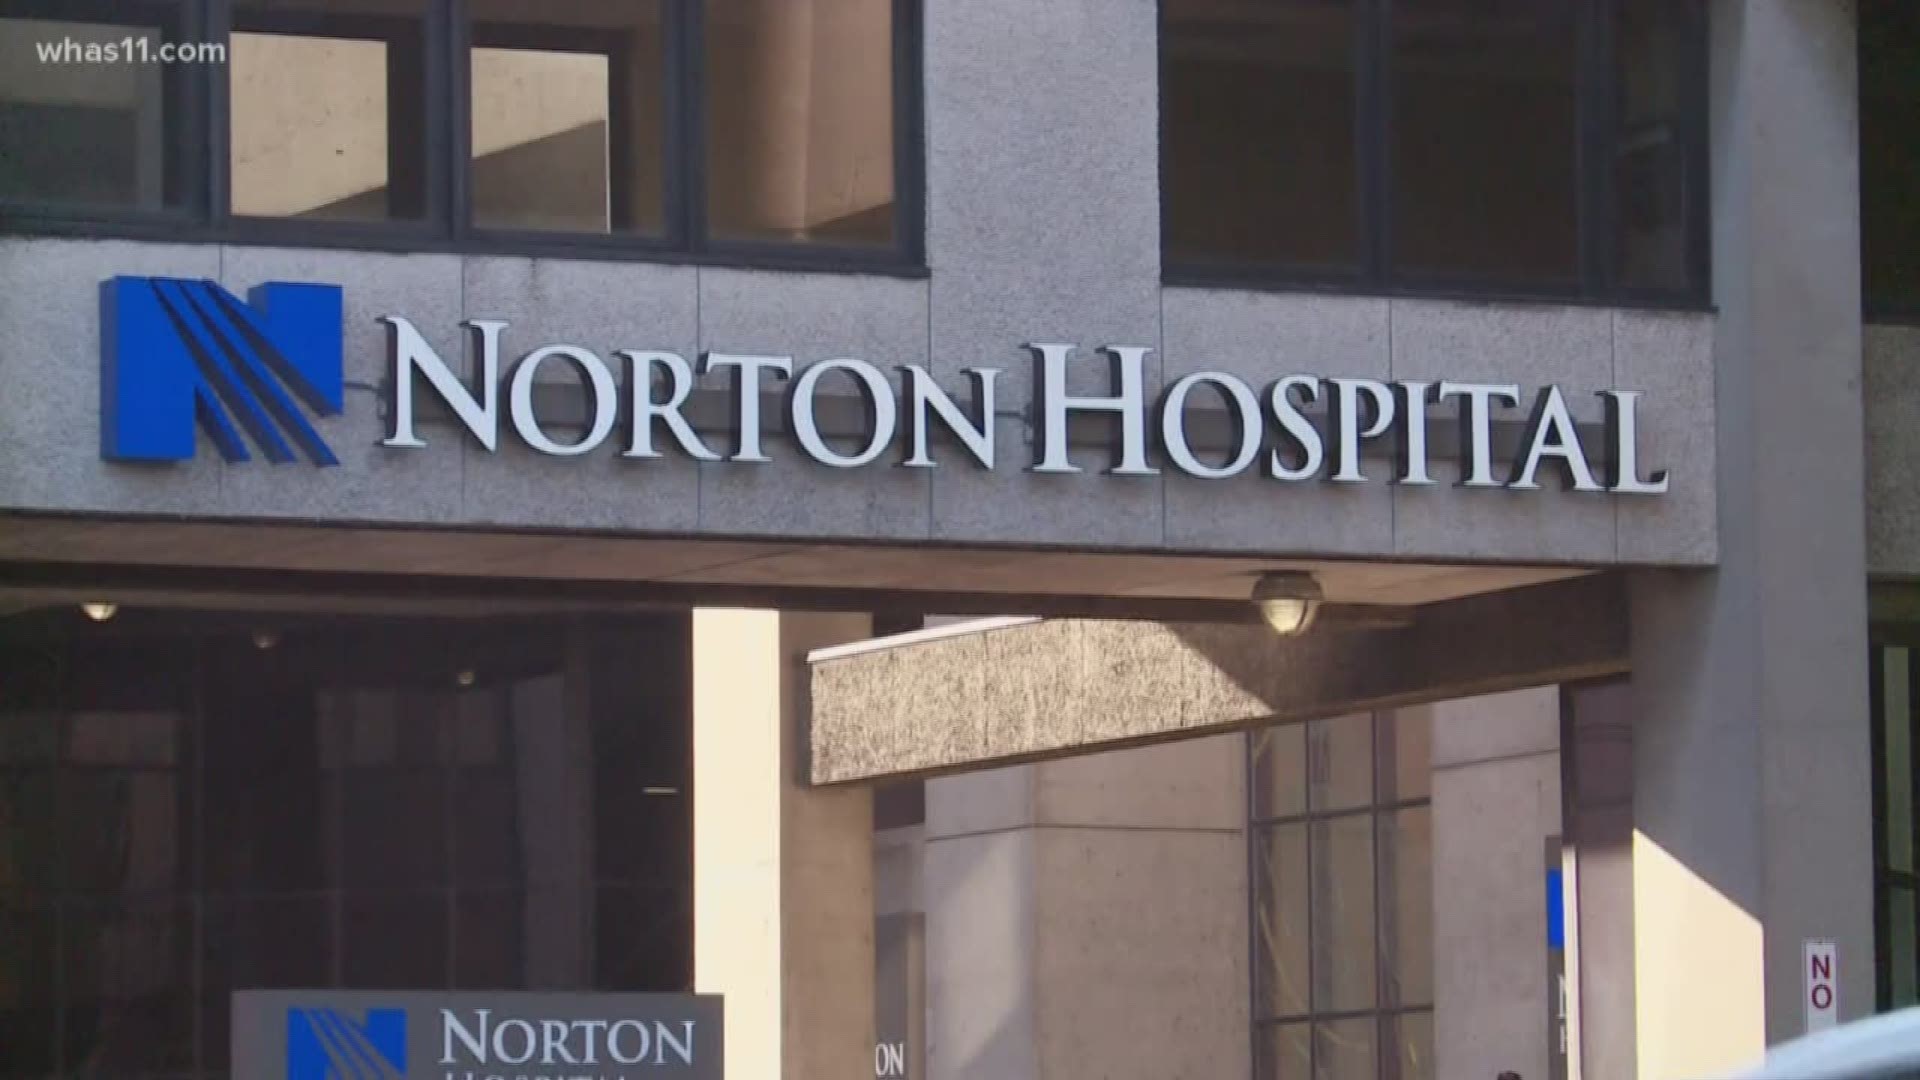 Cox said Norton has treated 127 patients with coronavirus, 34 are in inpatient care.